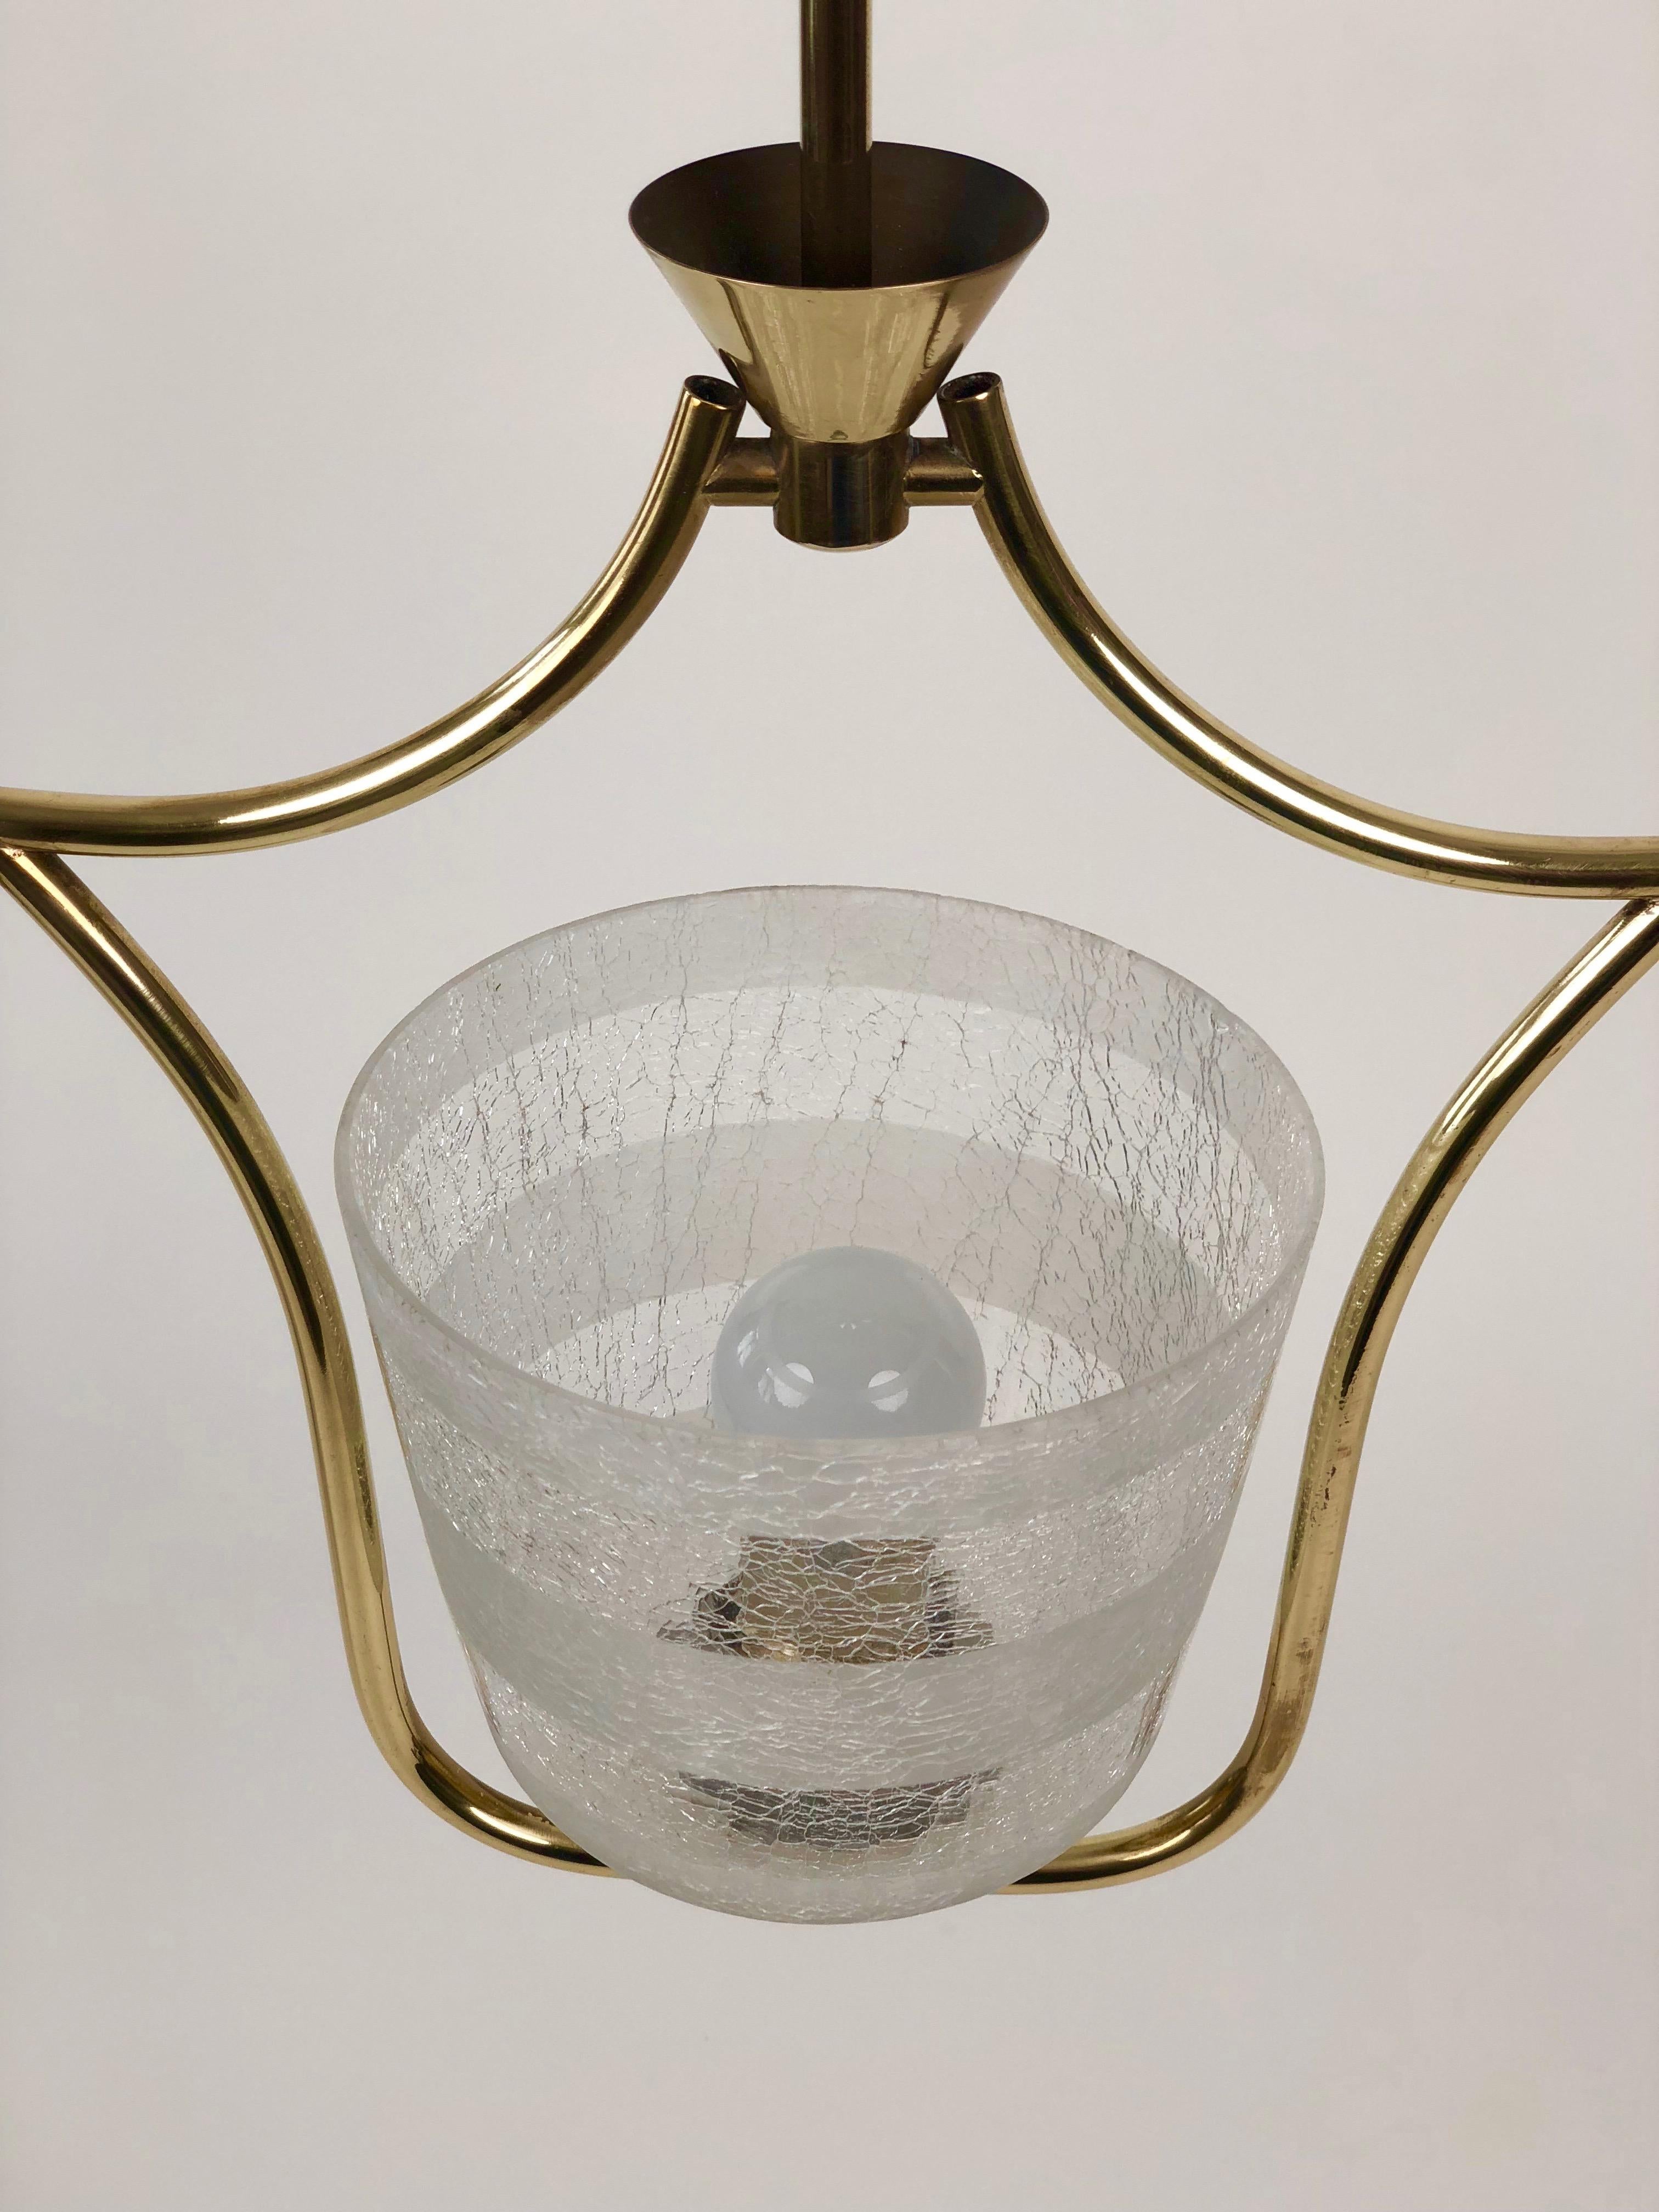 Hollywood Regency Styled Pendant Lamp in Brass and Glass, from Austria, 1950s For Sale 2